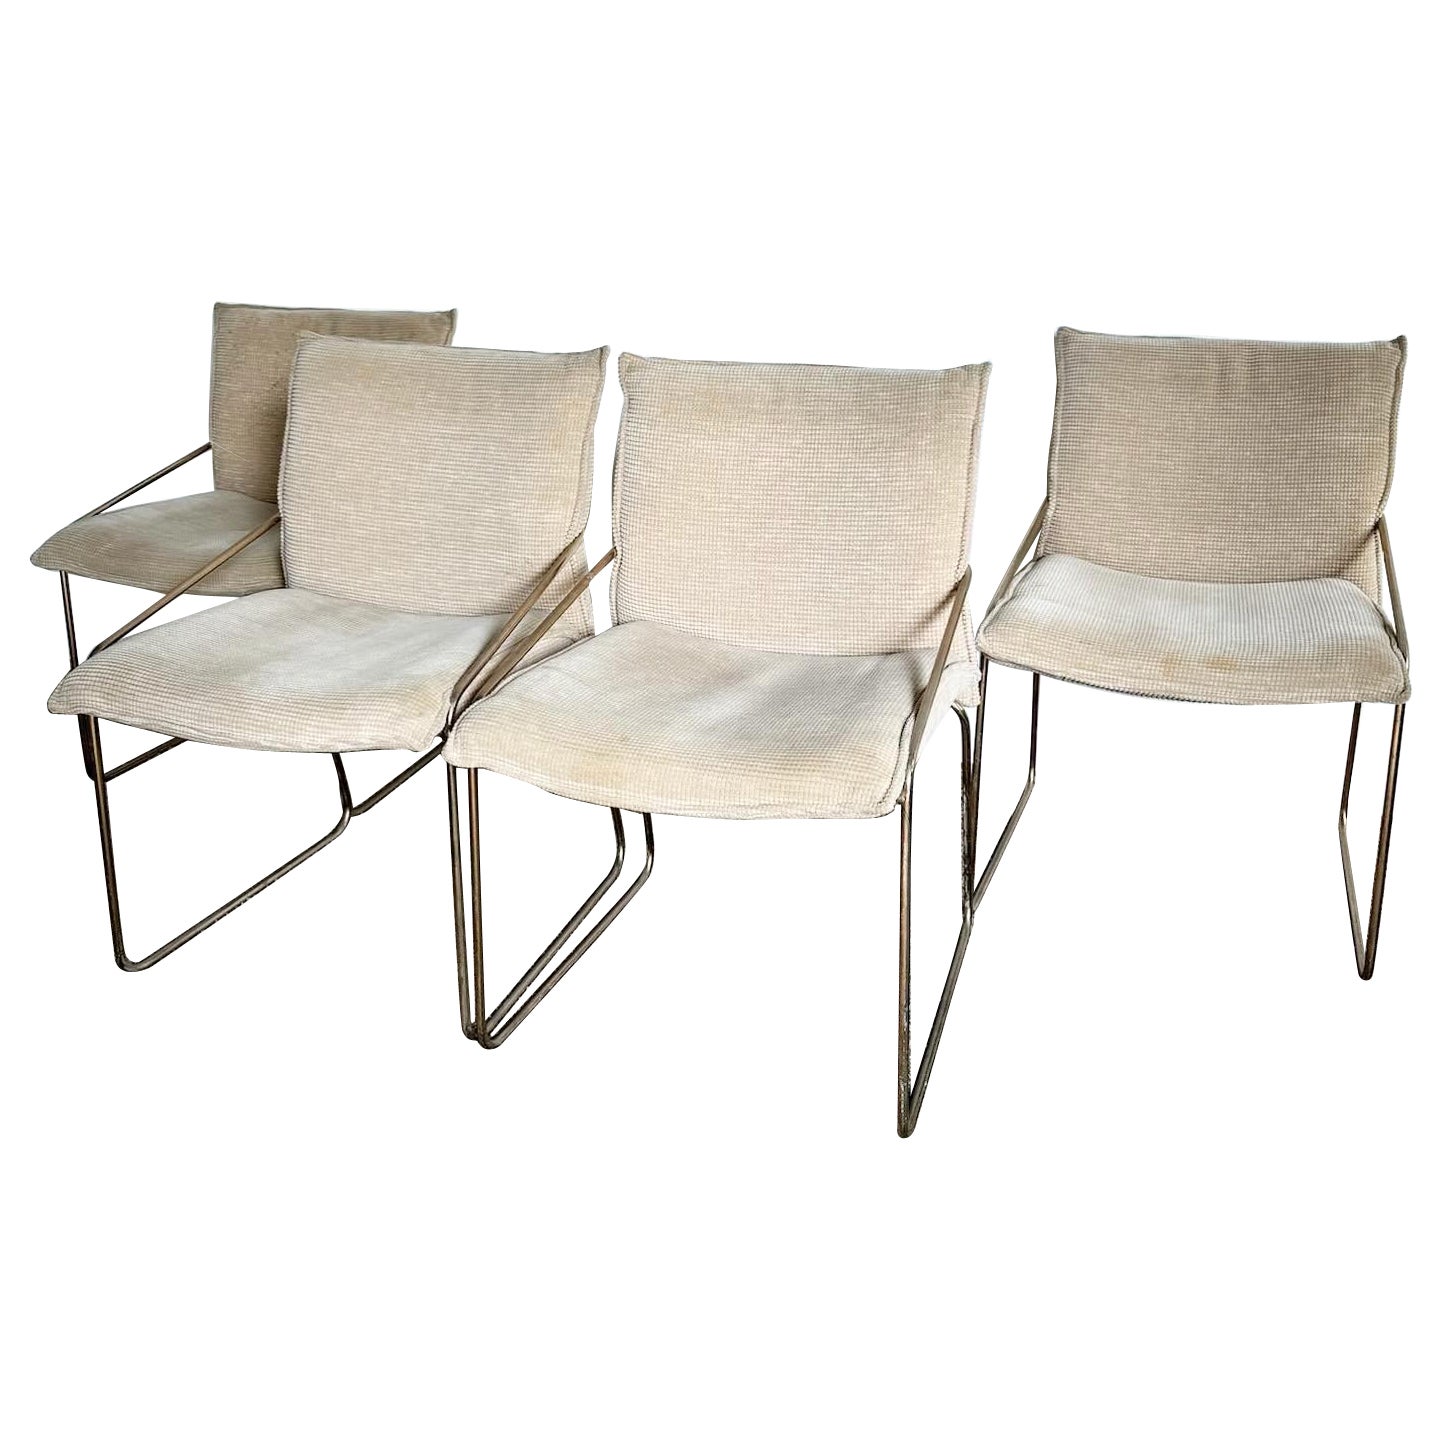 Italian Brass Finished Metal Dining Chairs by the Otto Gerdau Co. - Set of 4 For Sale